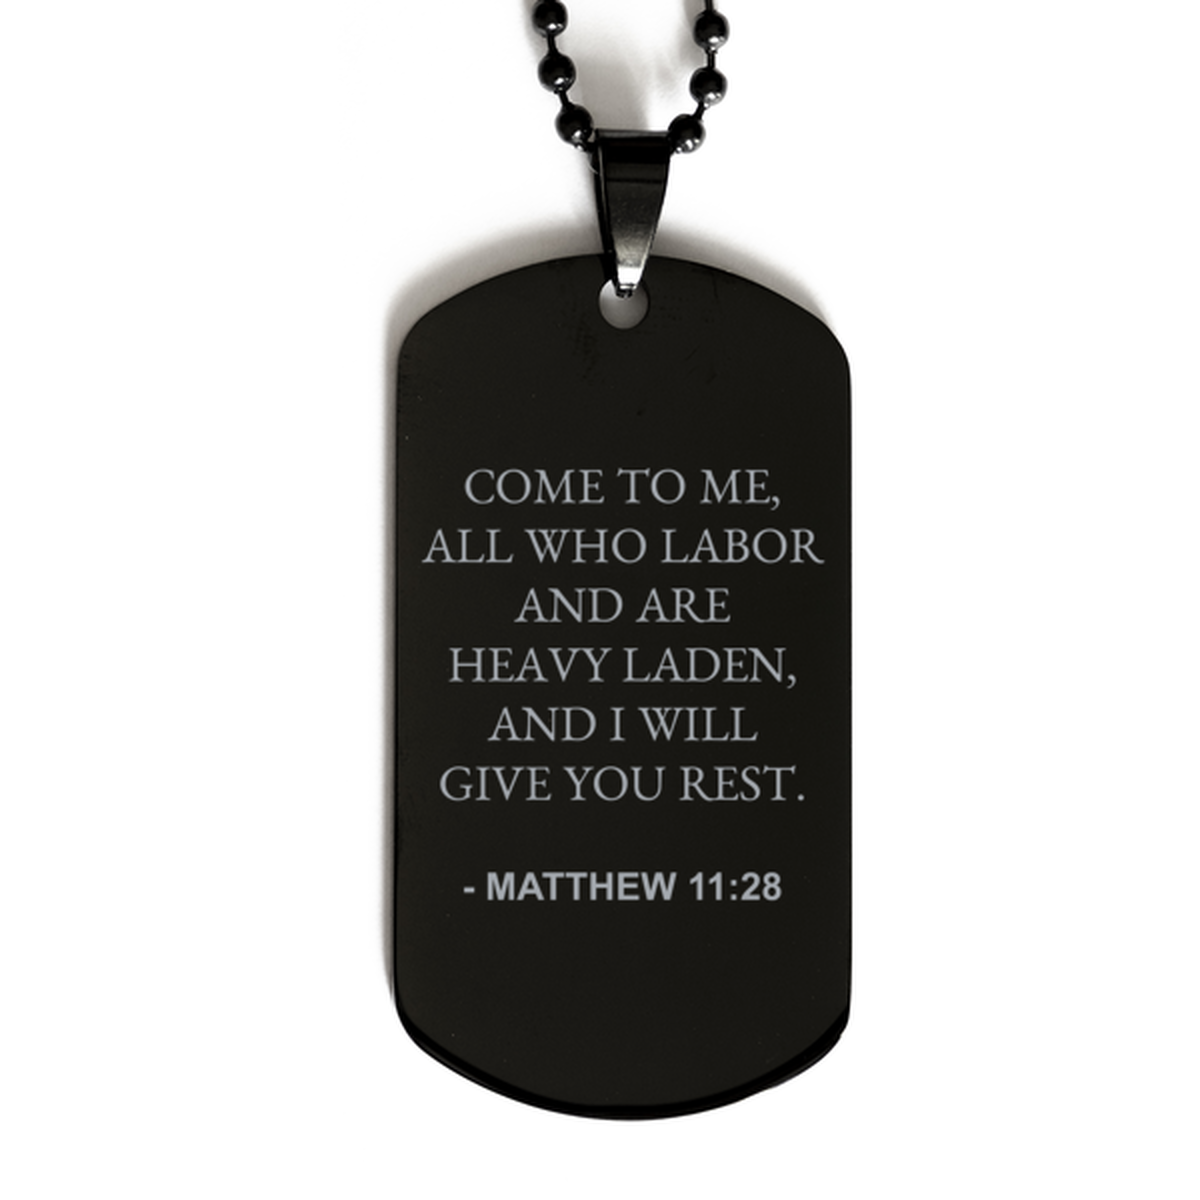 Bible Verse Black Dog Tag, Matthew 11:28 Come To Me All Who Labor And Are Heavy Laden,, Christian Inspirational Necklace Gifts For Men Women